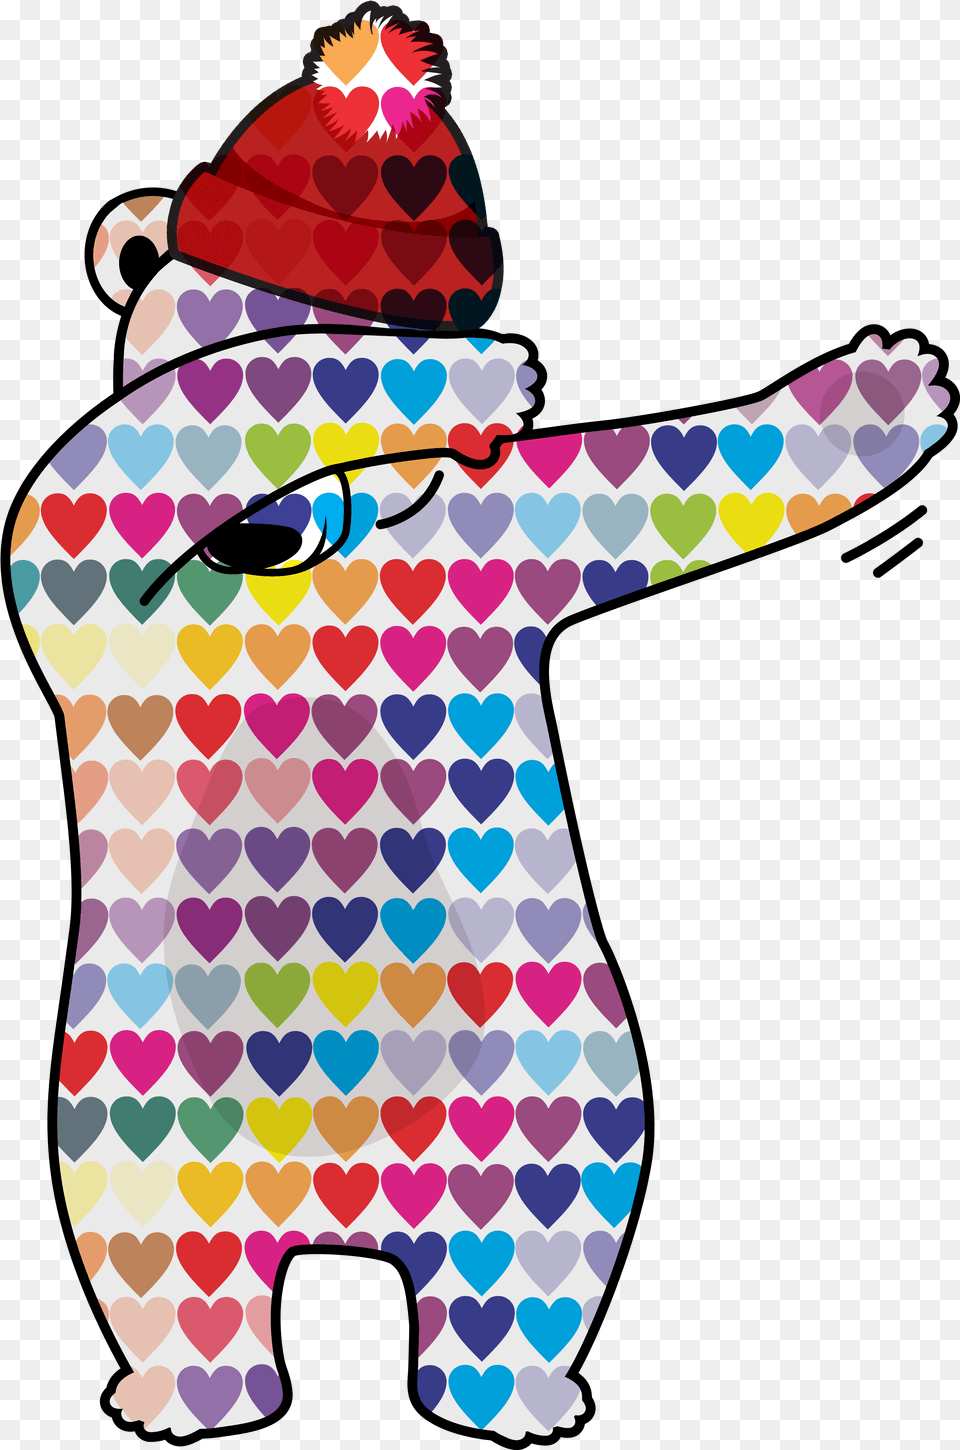 A Great Bear Design With Hearts And Red Bobble Hat Valentine39s Day, Animal, Reptile, Snake, Art Free Transparent Png